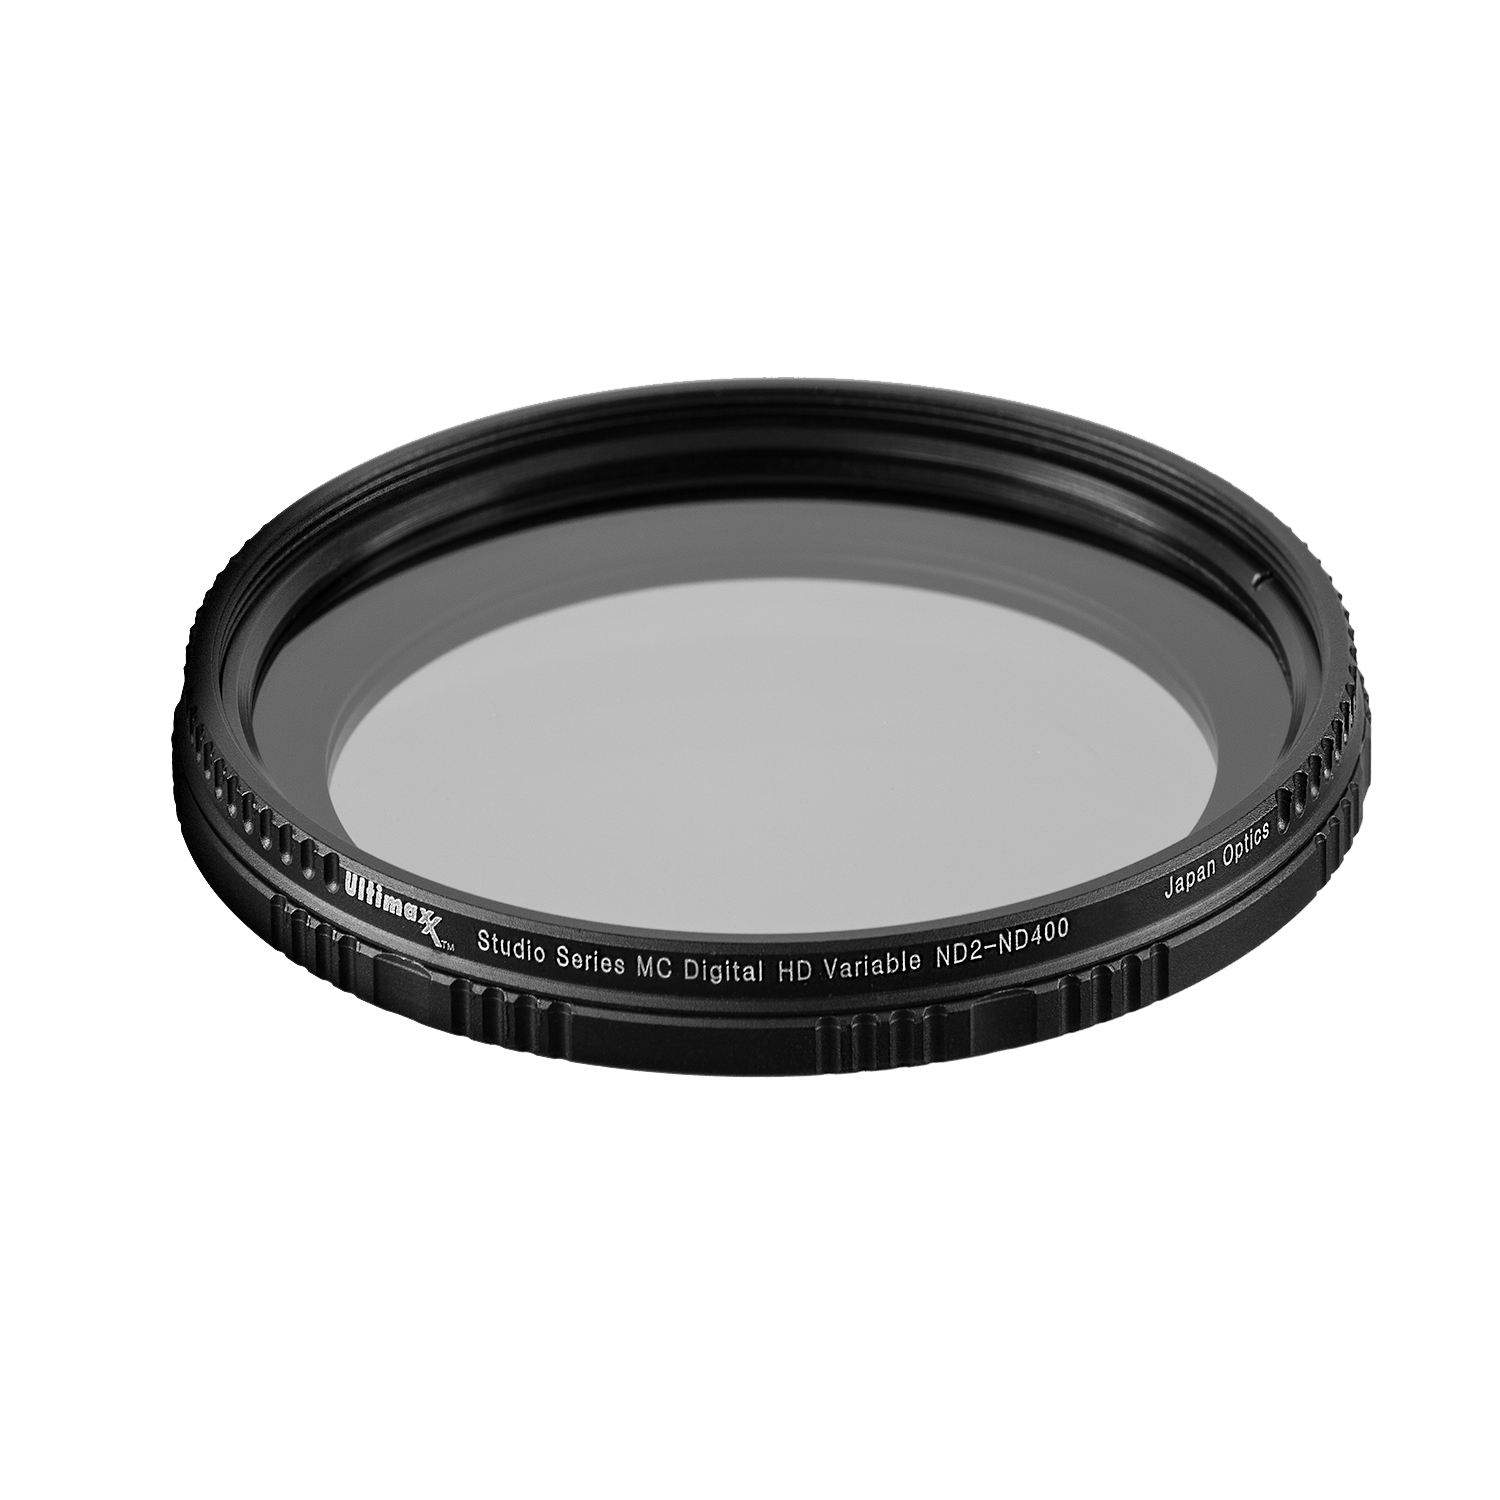 Ultimaxx 105mm VARIABLE NEUTRAL DENSITY FILTER ND2-ND400